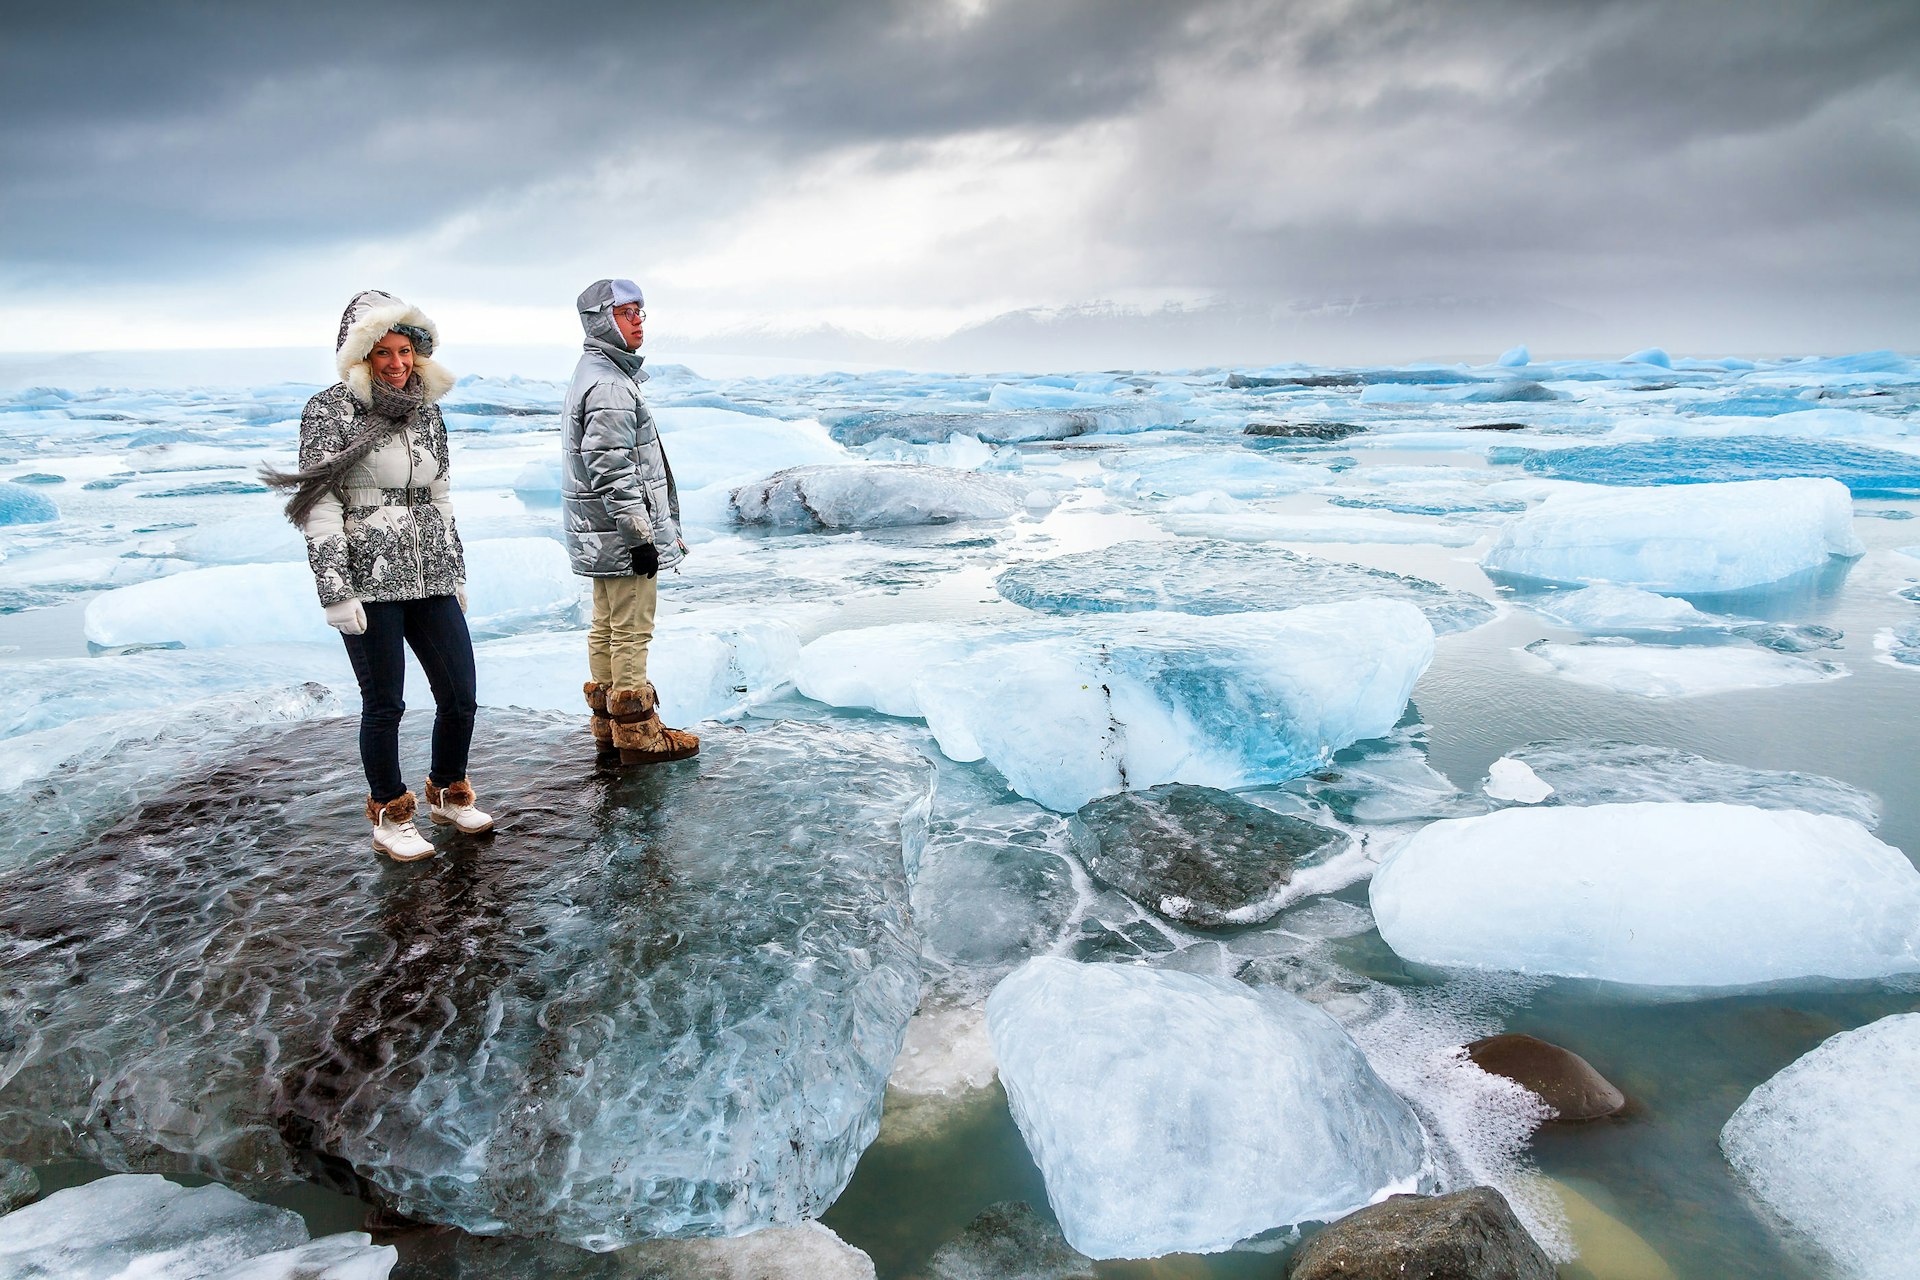 Tourists stand on the massive icebergs in lake Jokulsarlon in Iceland in winter